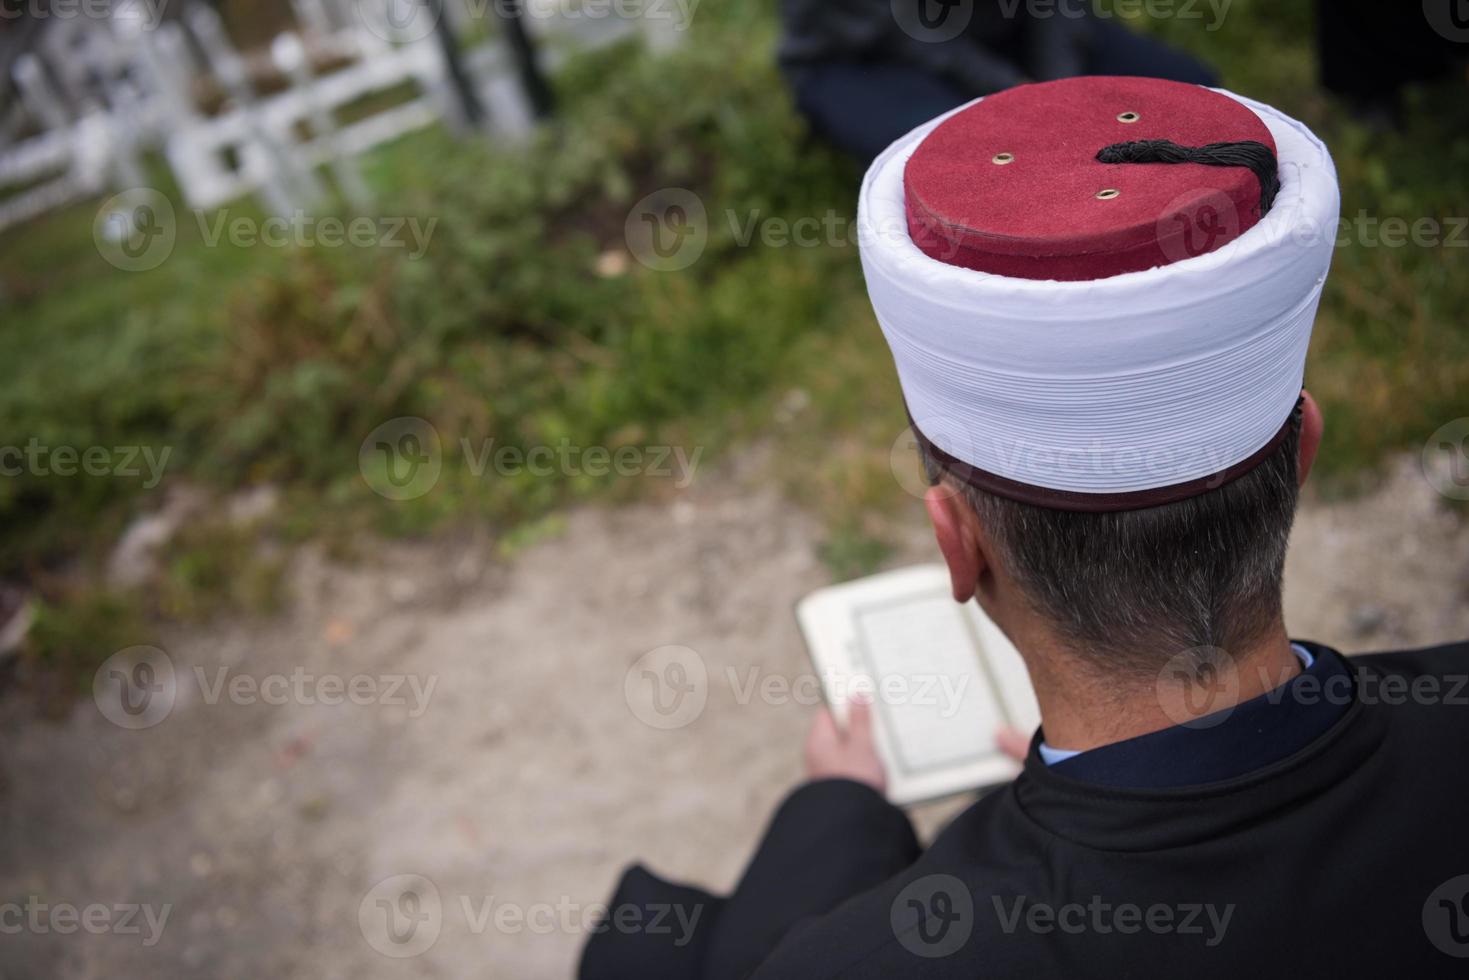 quran holy book reading by imam  on islamic funeral photo